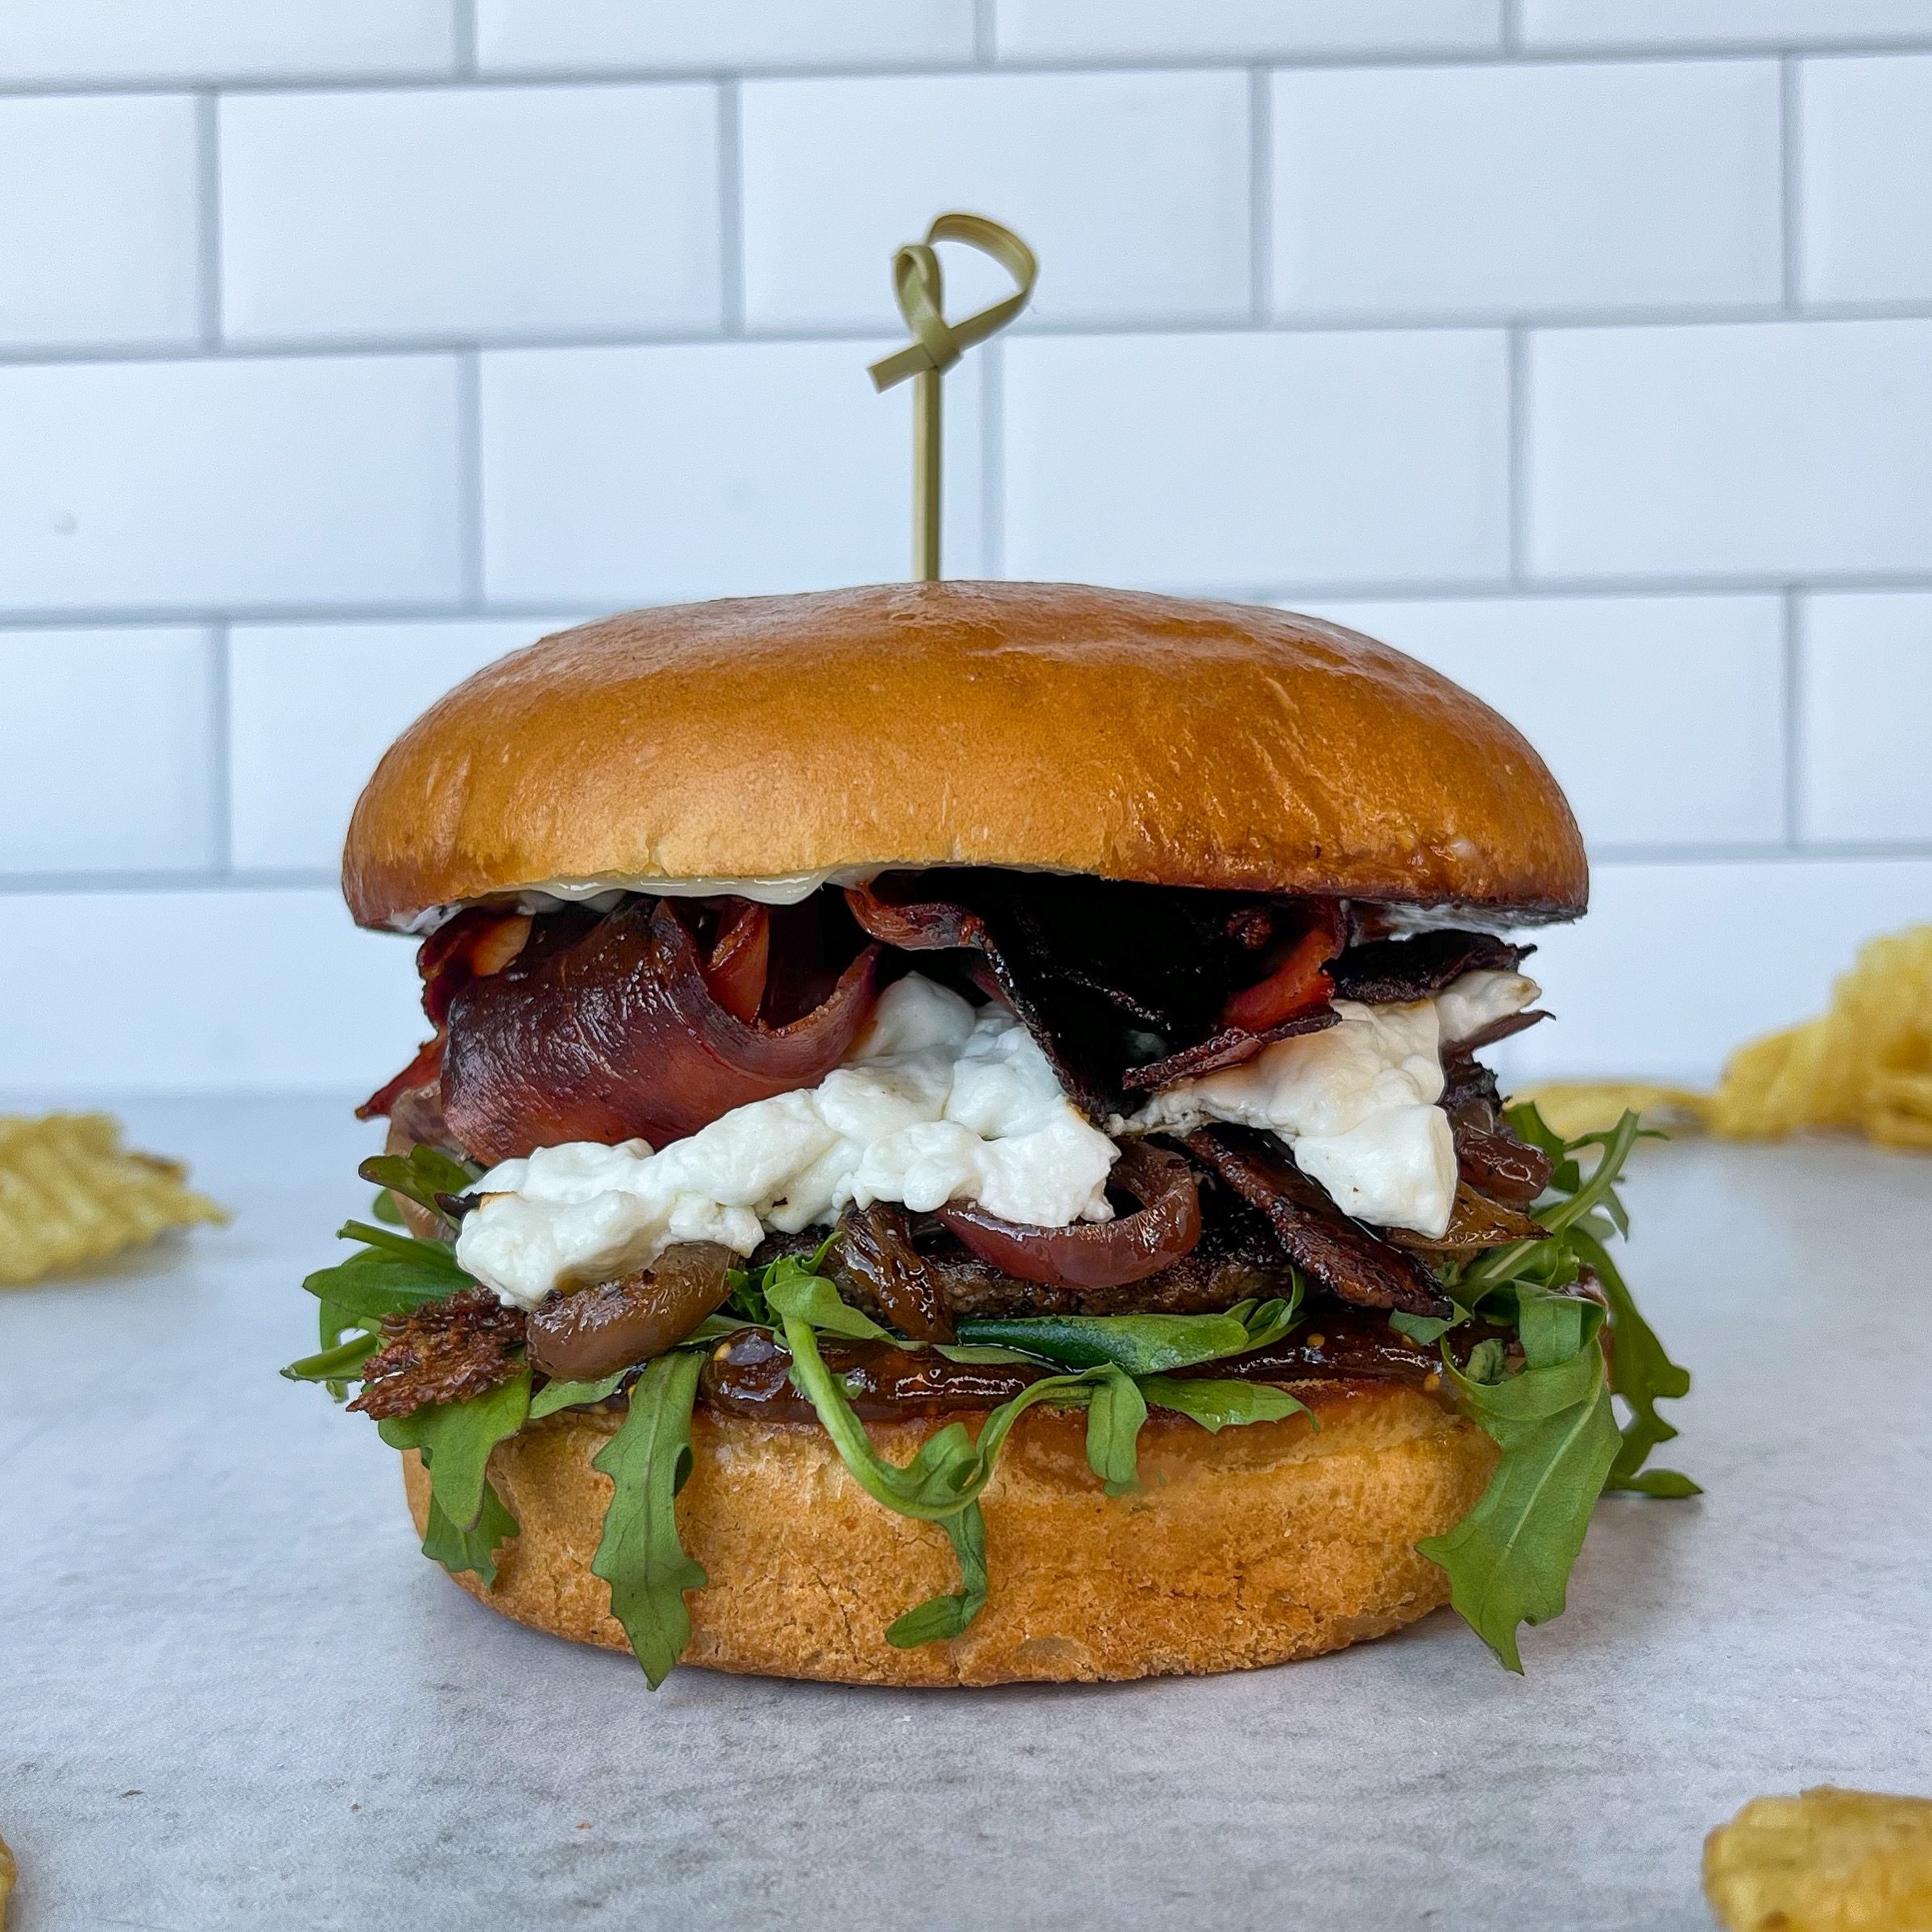 Your sweet &amp; salty dreams 💭🧂 Wedge Parkway has a Fig &amp; Goat Cheese Burger on the specials menu this week, seasoned all-natural ground chuck patty with red wine brown sugar braised onions, creamy goat cheese, fig spread, fresh arugula and cr